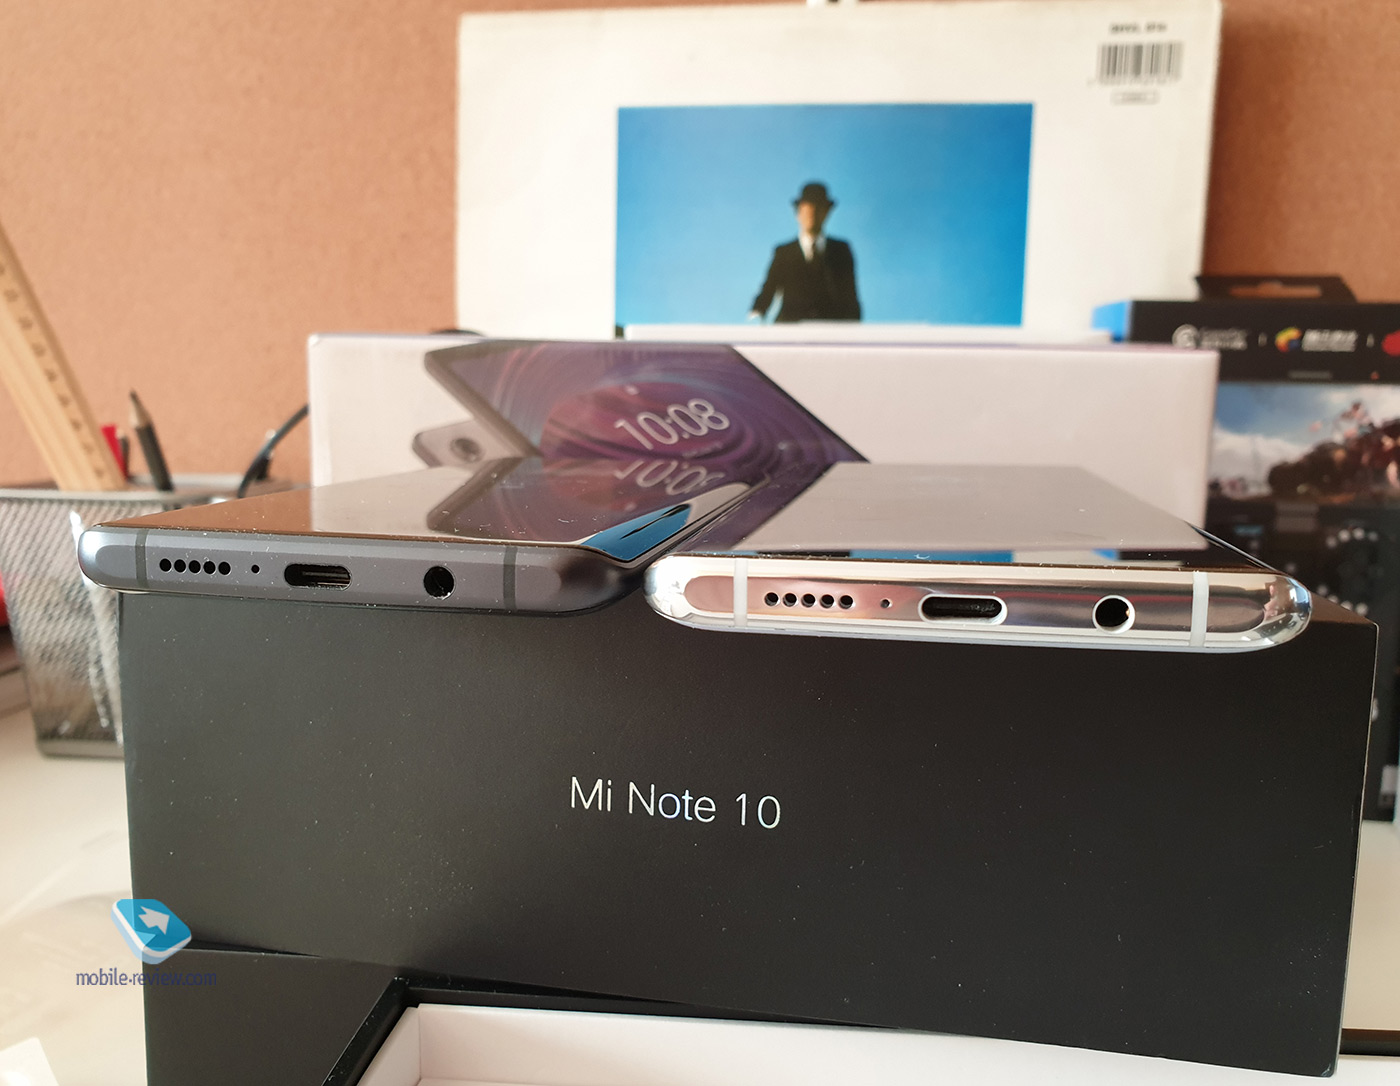 Mi Note 10 or Mi Note 10 Lite: to save 7 rubles or not?